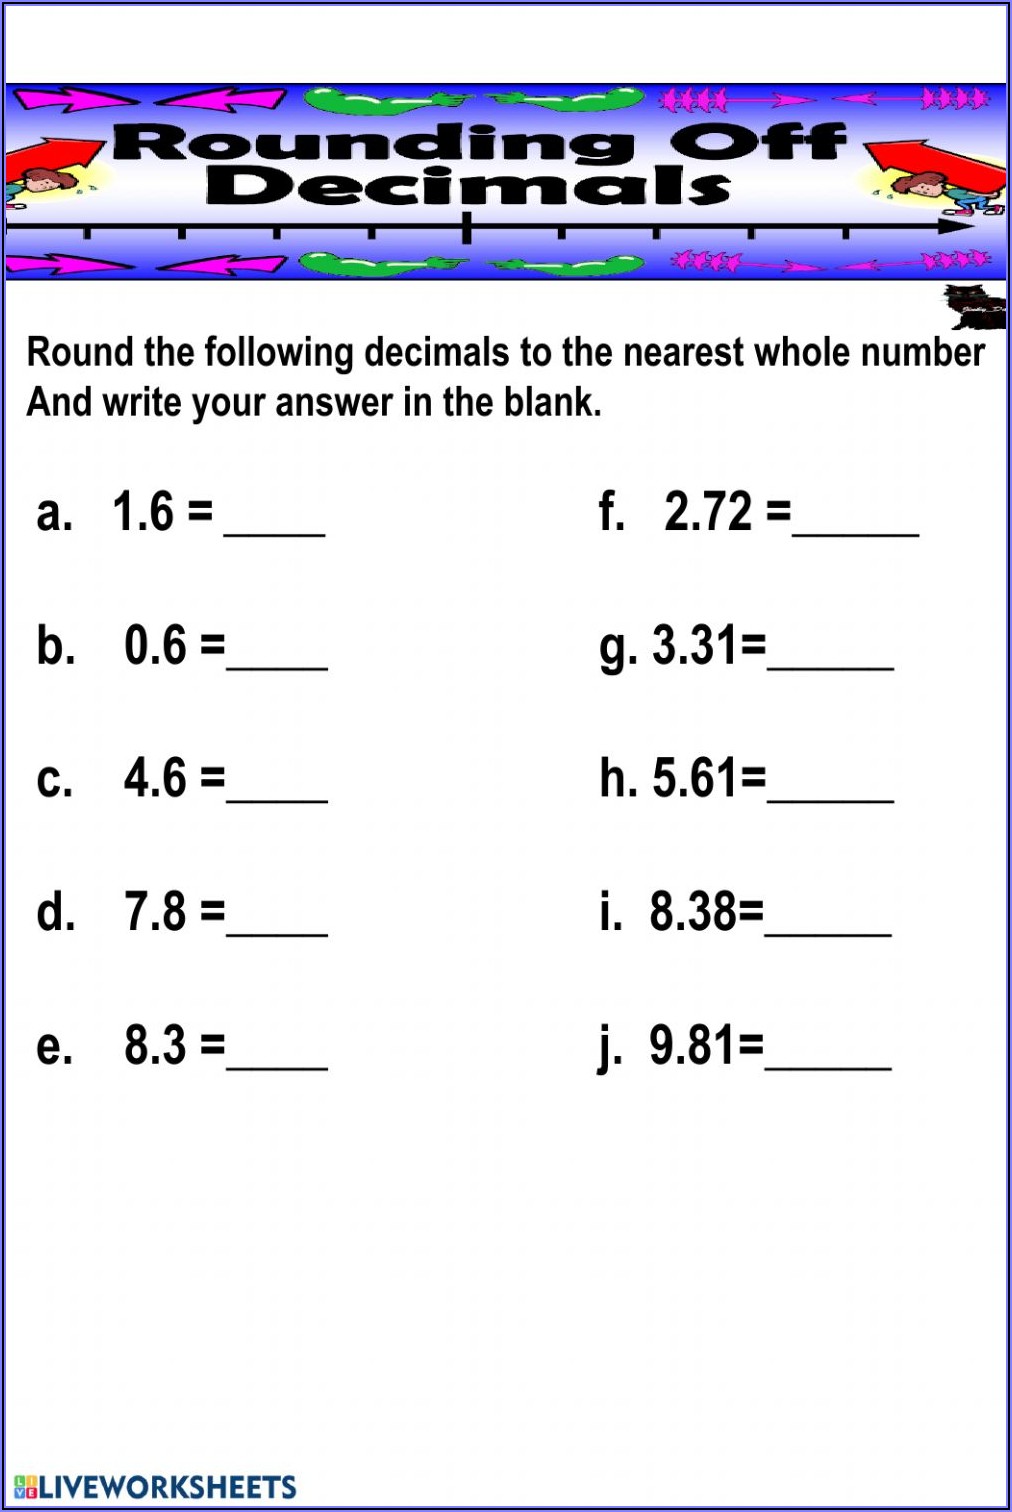 Rounding Decimals To The Nearest Whole Number Worksheet Pdf